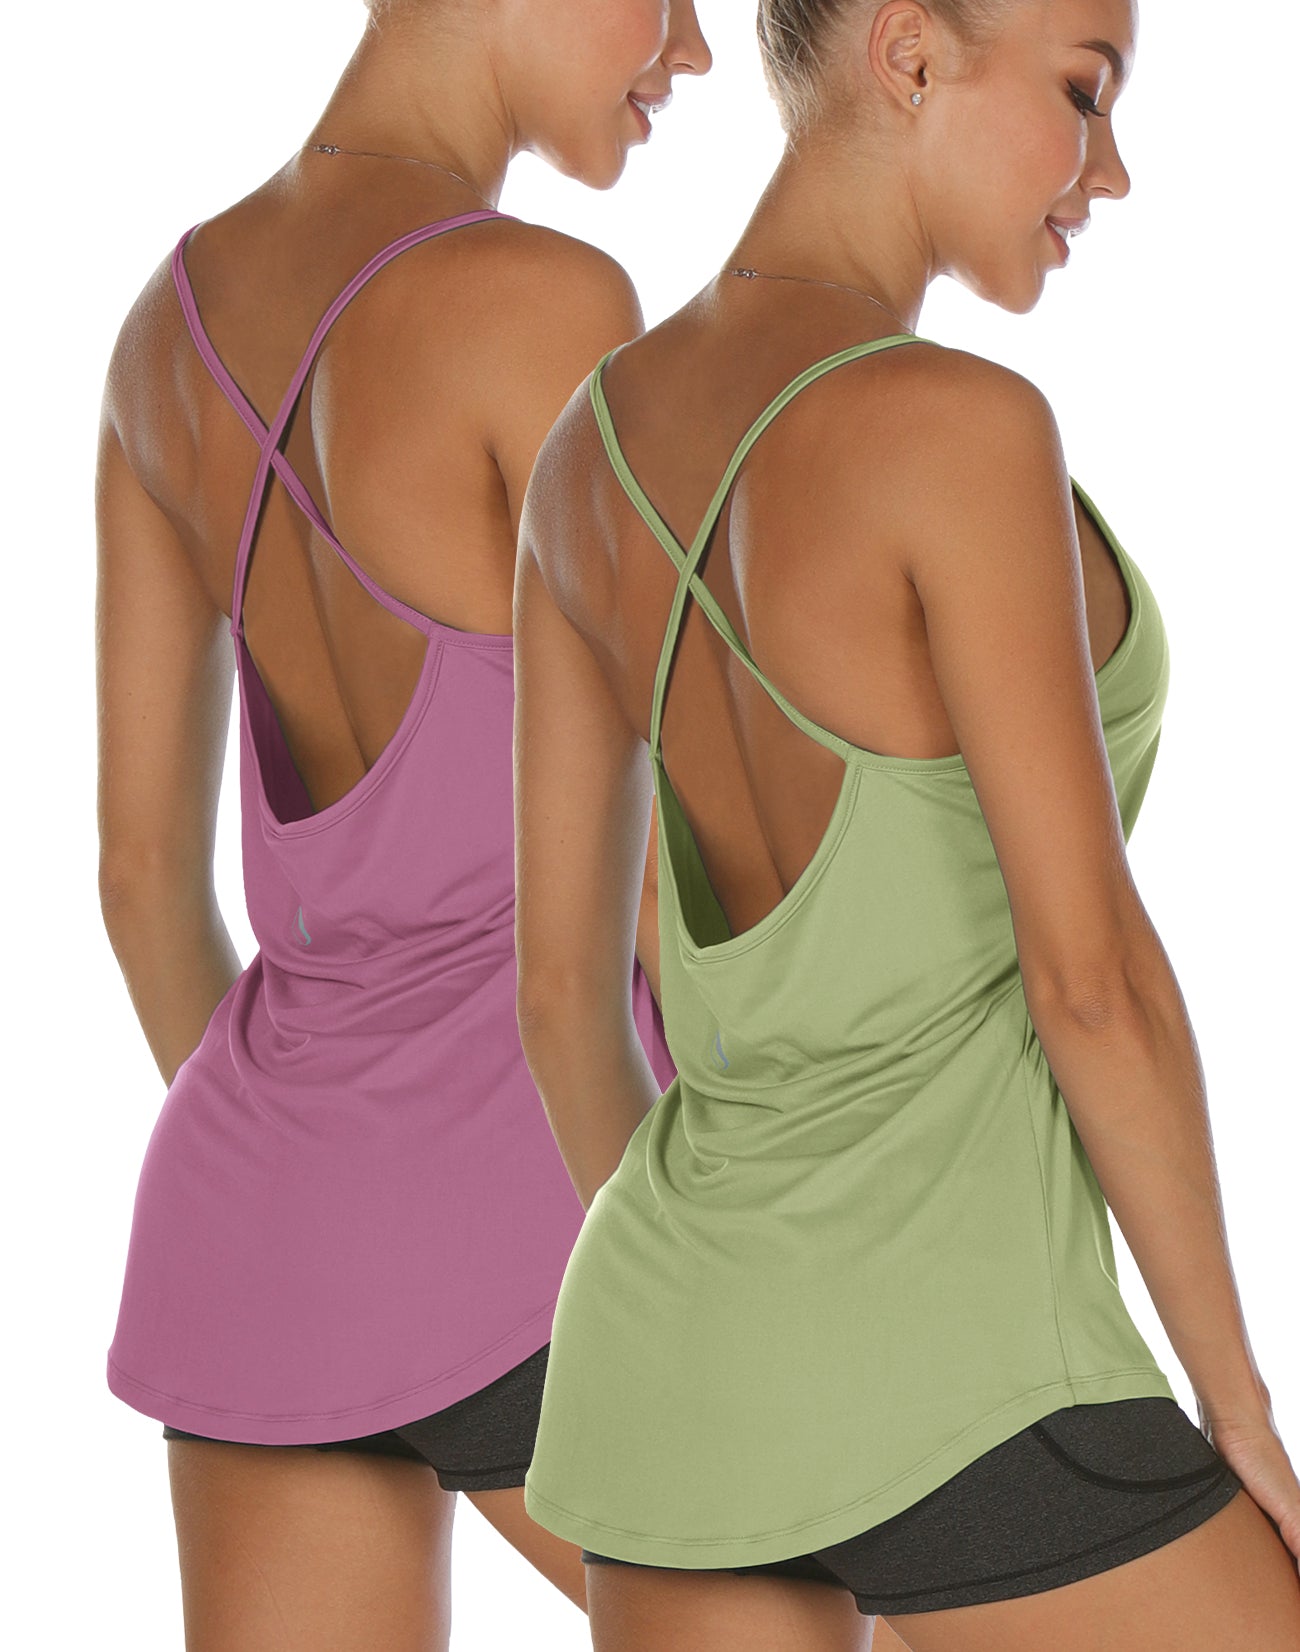 Women's Yoga Sports Tank Top, Spaghetti Strap Cut Out Back Sexy Running  Fitness Yoga Top